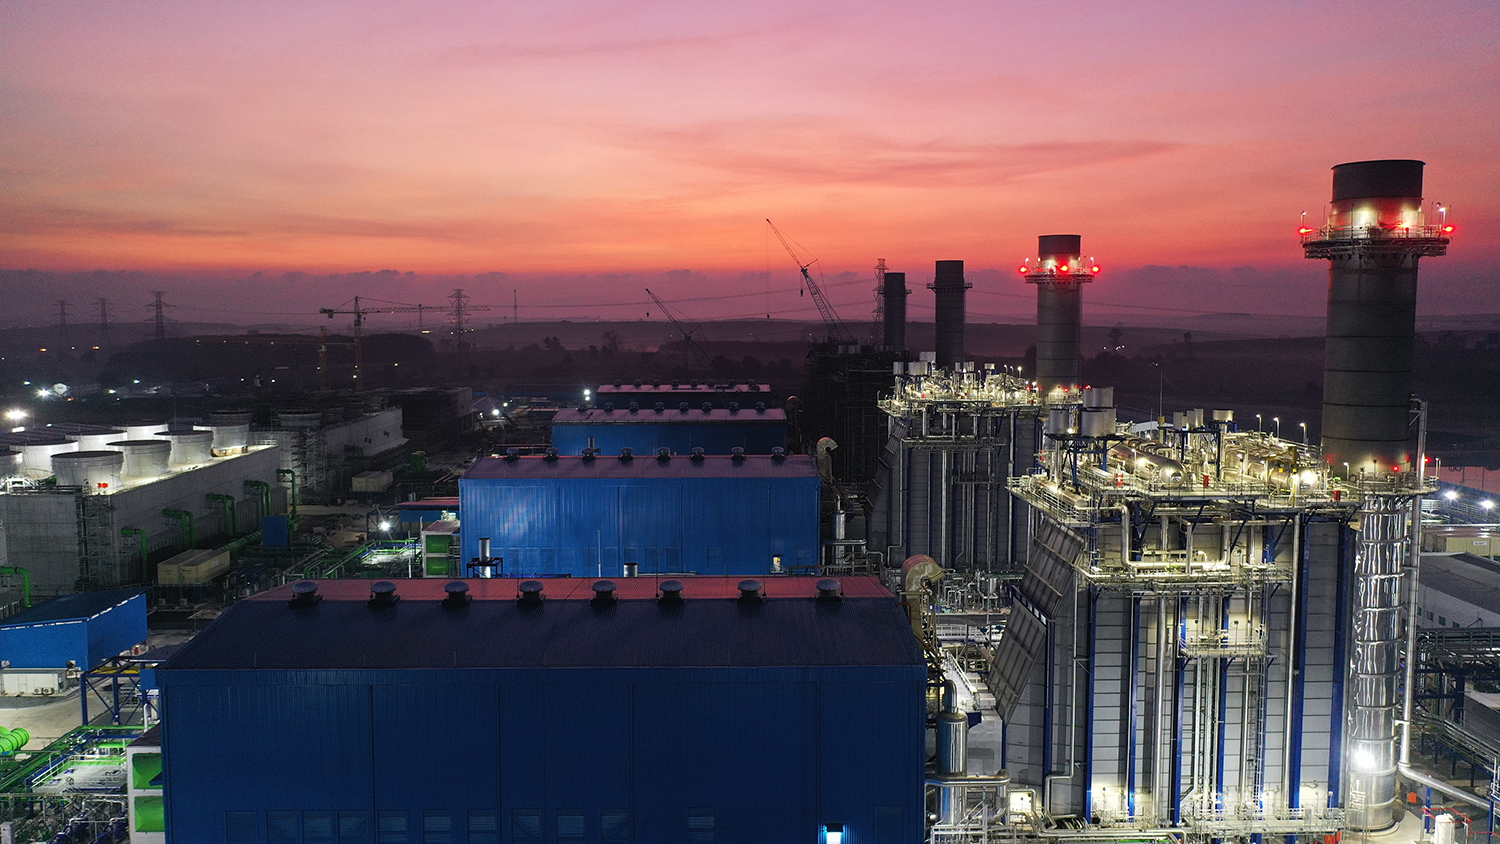 The GTCC Power Plant in Rayong